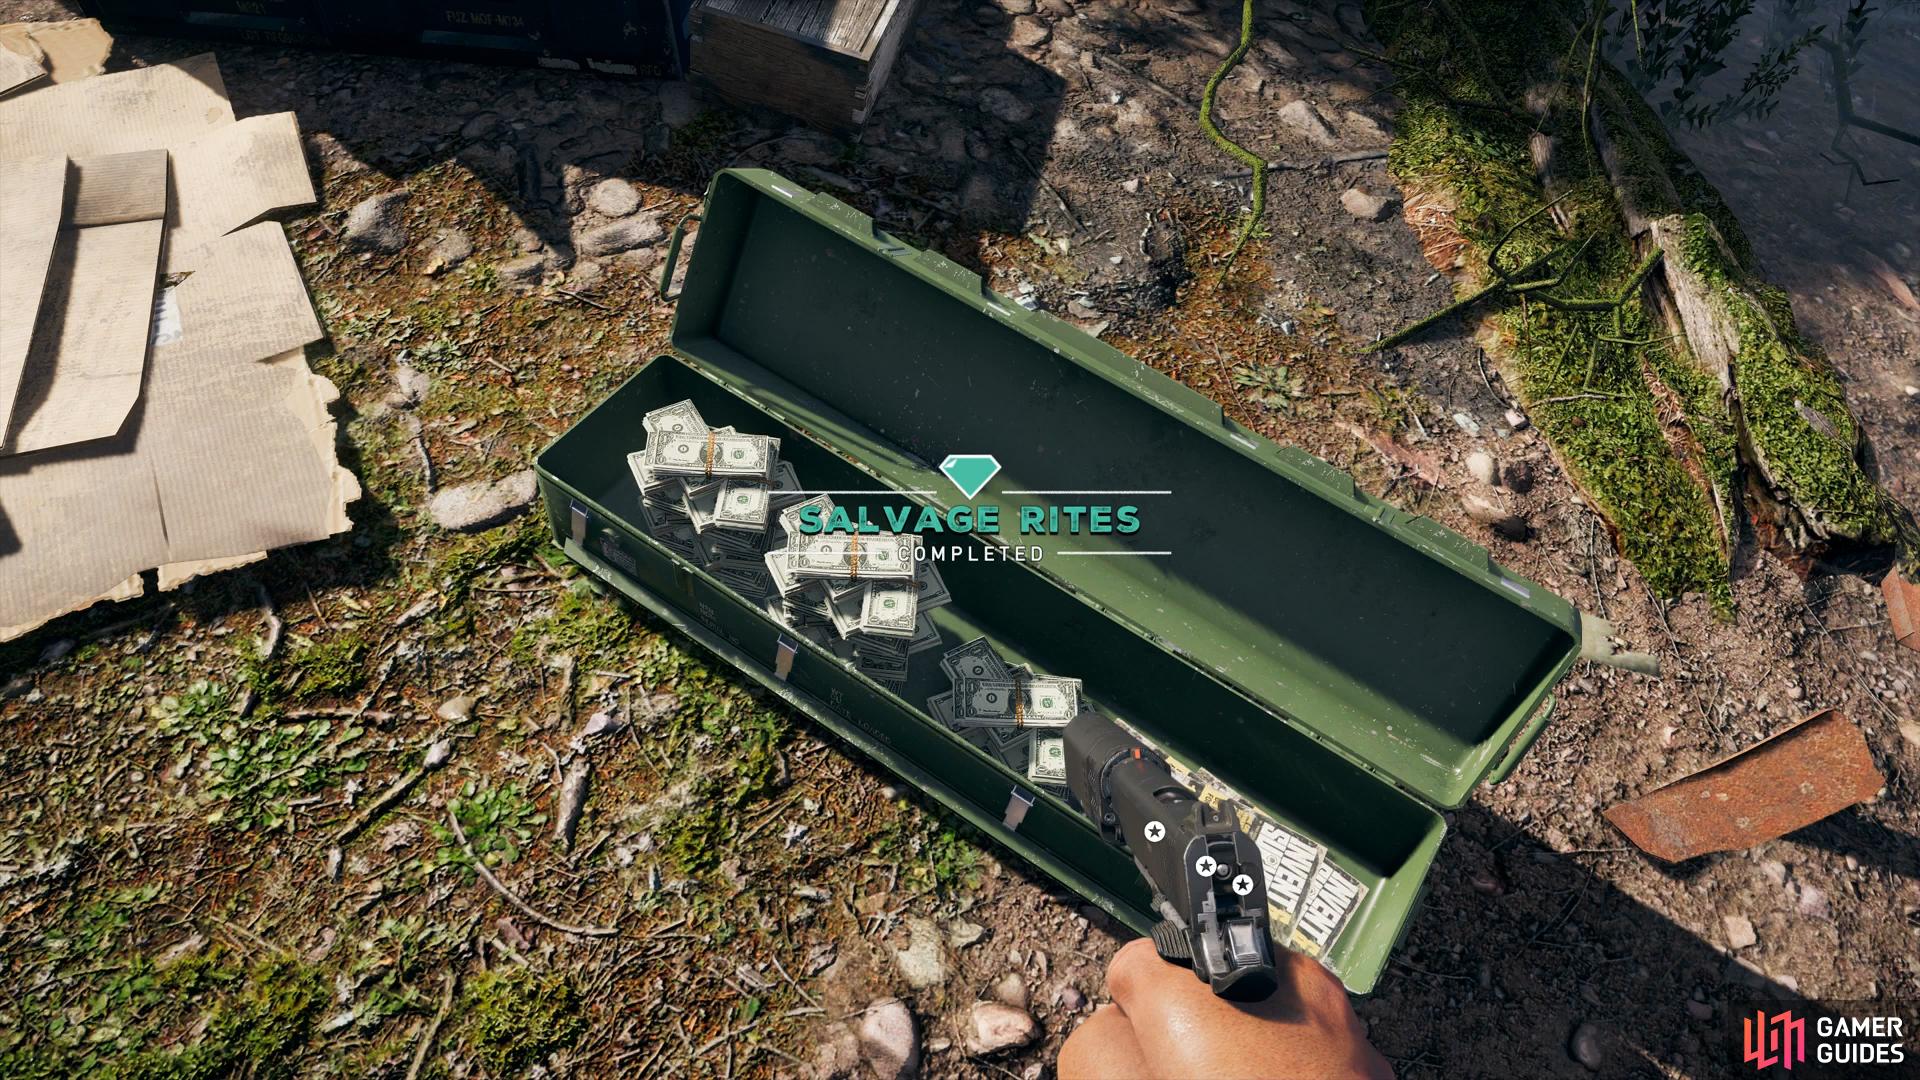 return to the camp and open the lockbox to find the stash.